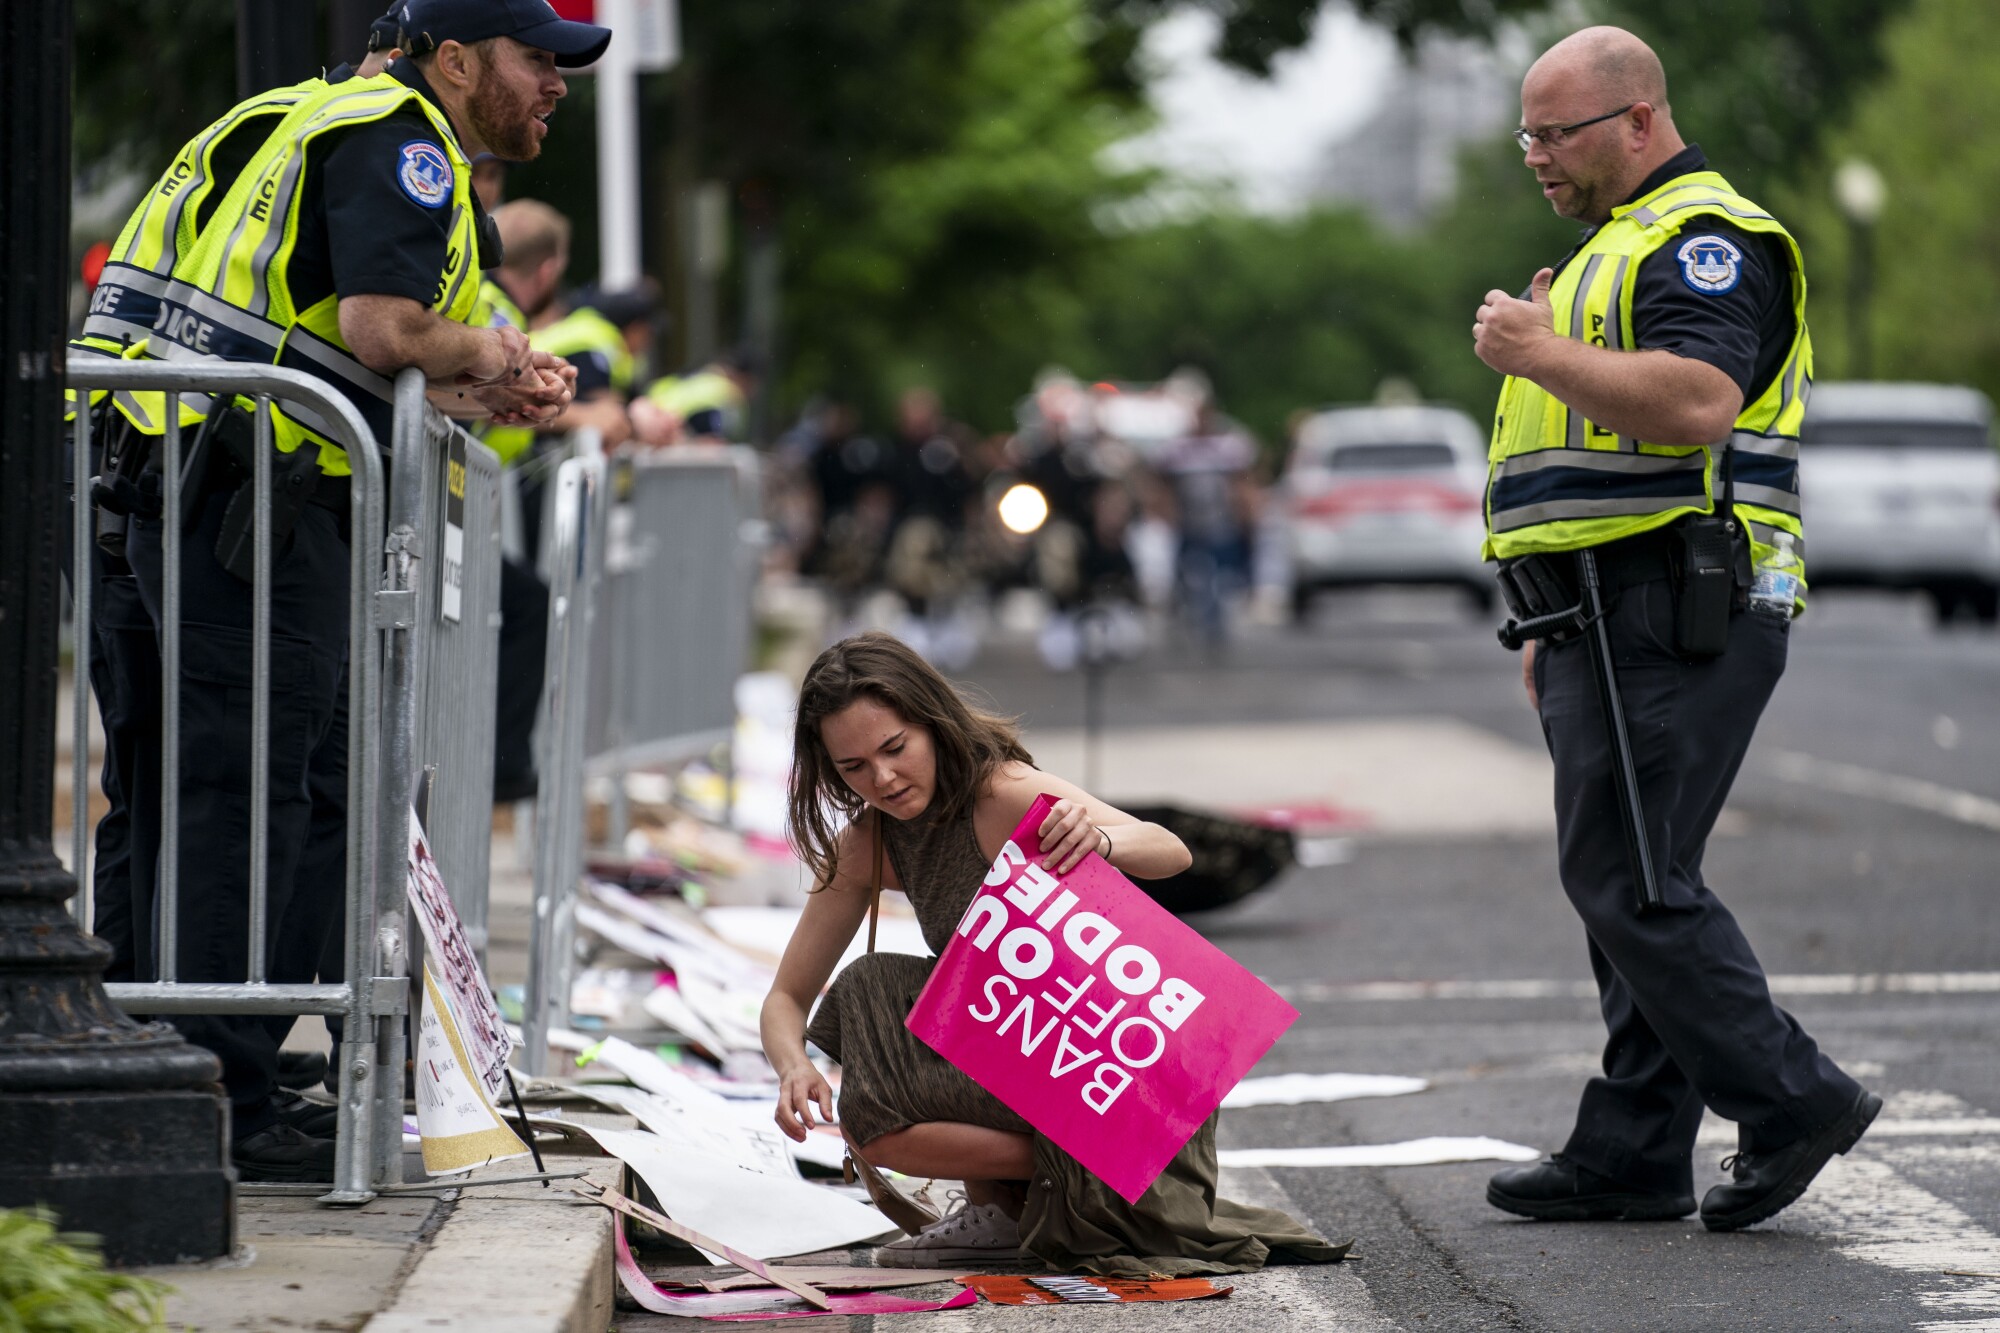     A protester puts the signs back on the barricades after the signs are removed by the Capitol police officers.